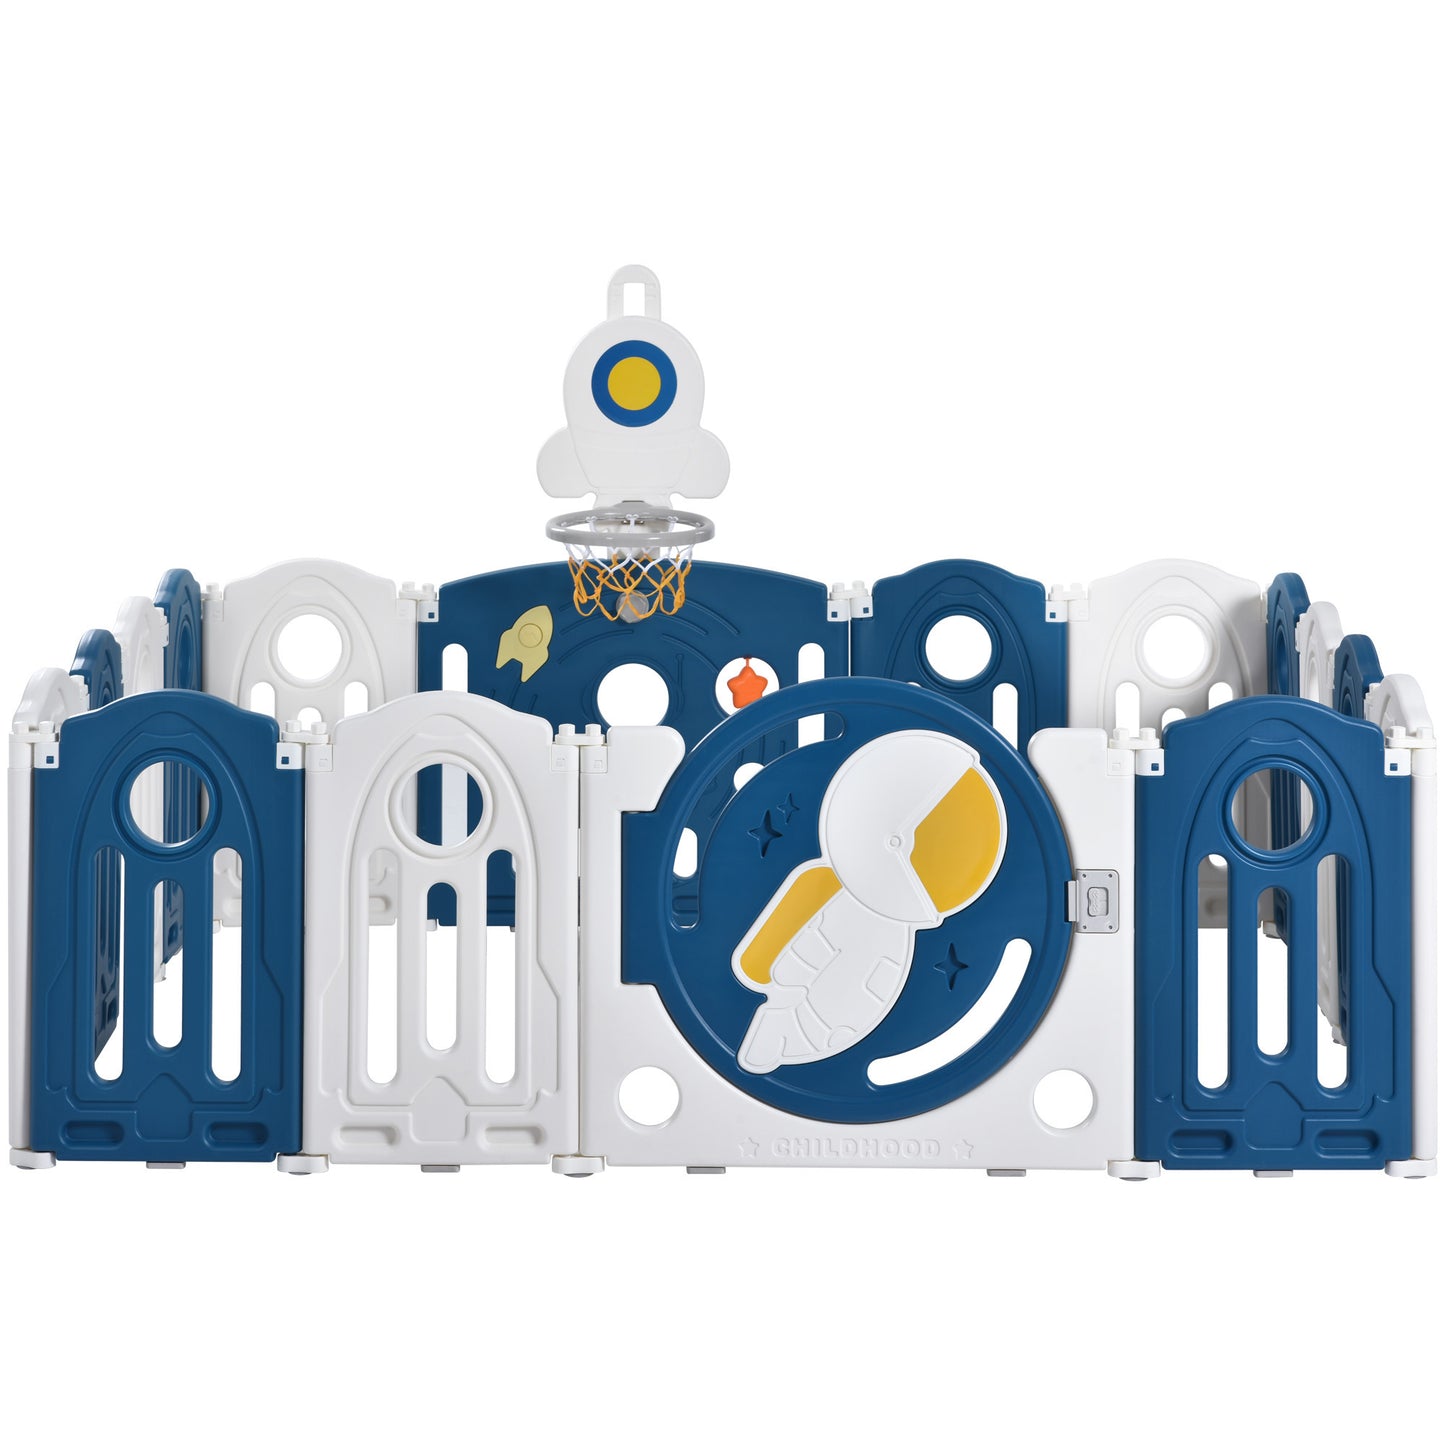 Baby Playpen for Toddler, Astronaut Theme Kids Activity Center with Freestanding Swing Playset, Safety Large Play Yard Home Indoor & Outdoor Safety Gates Foldable Play Pens with Game&Swing for Babies